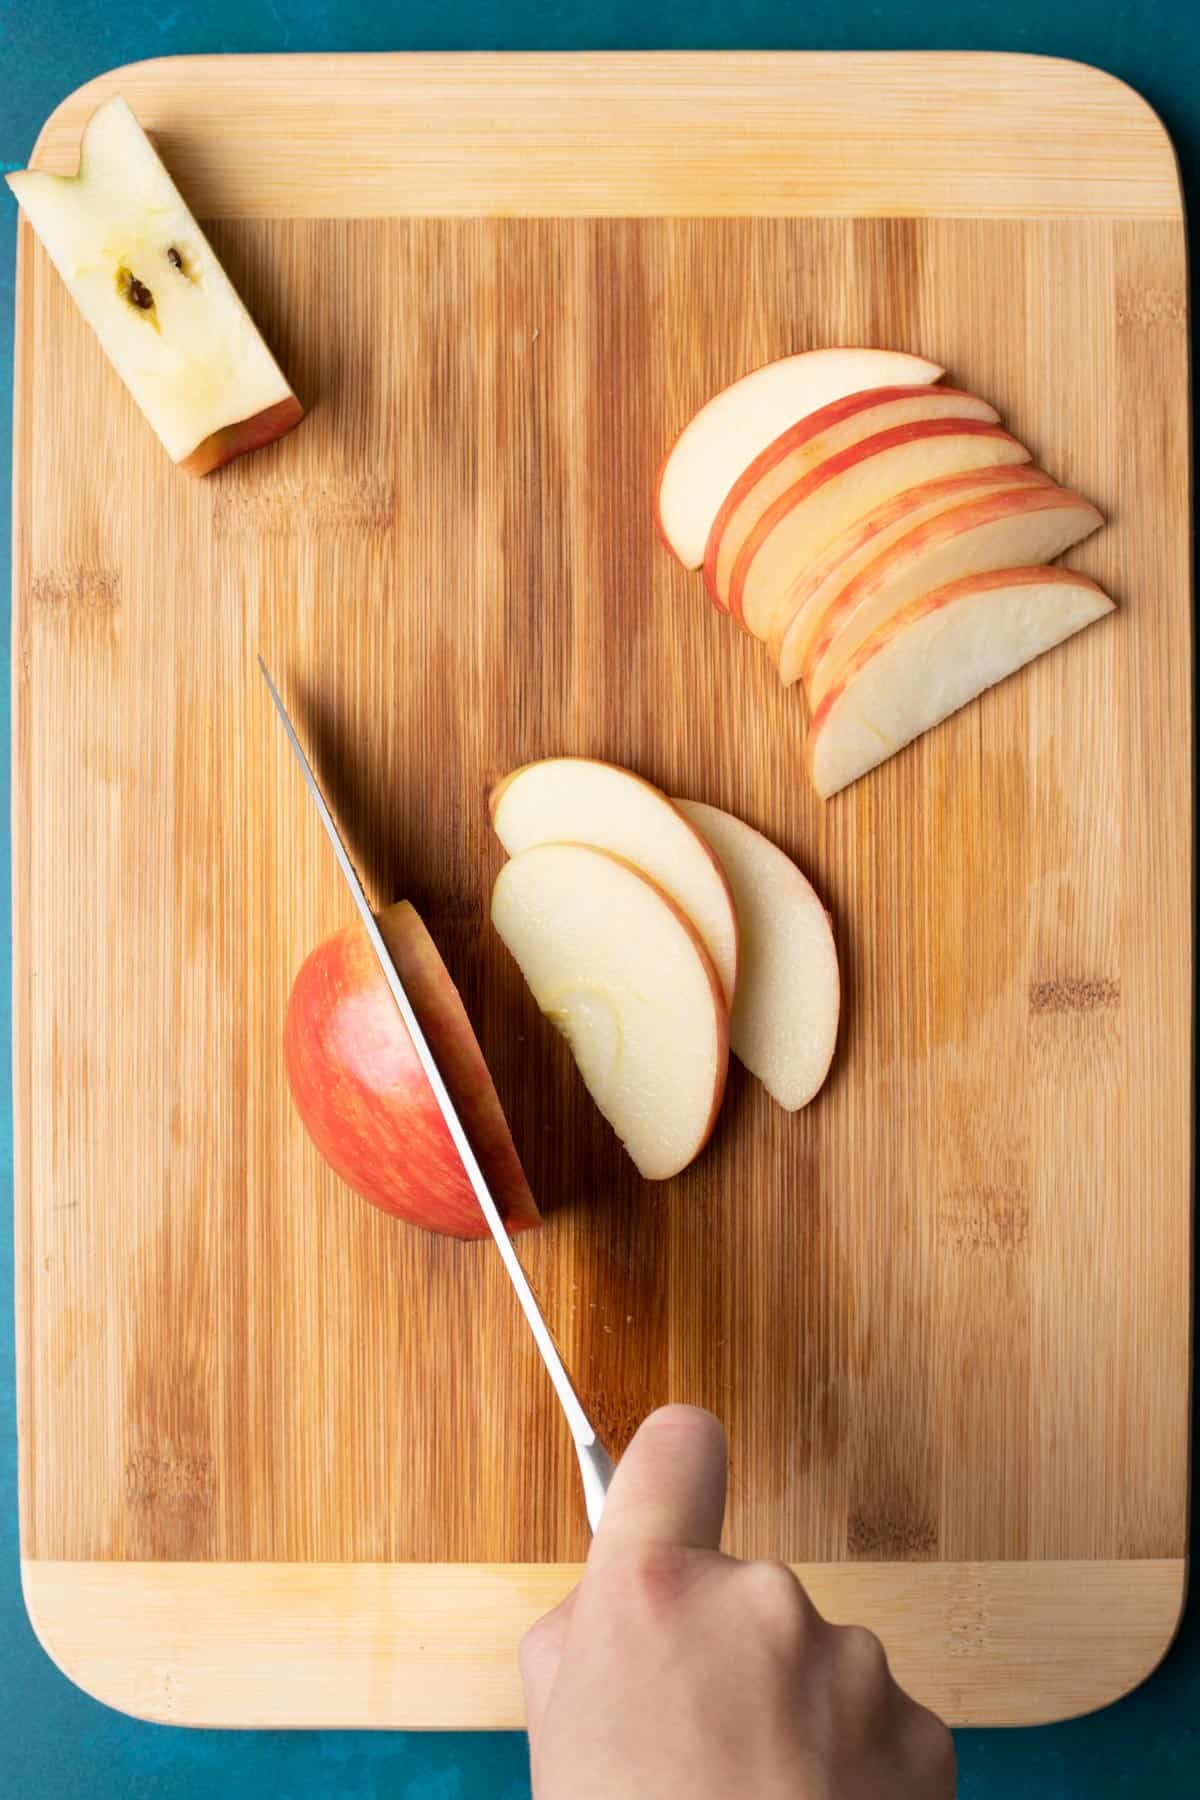 A knife cutting the sides of an apple into thin slices.